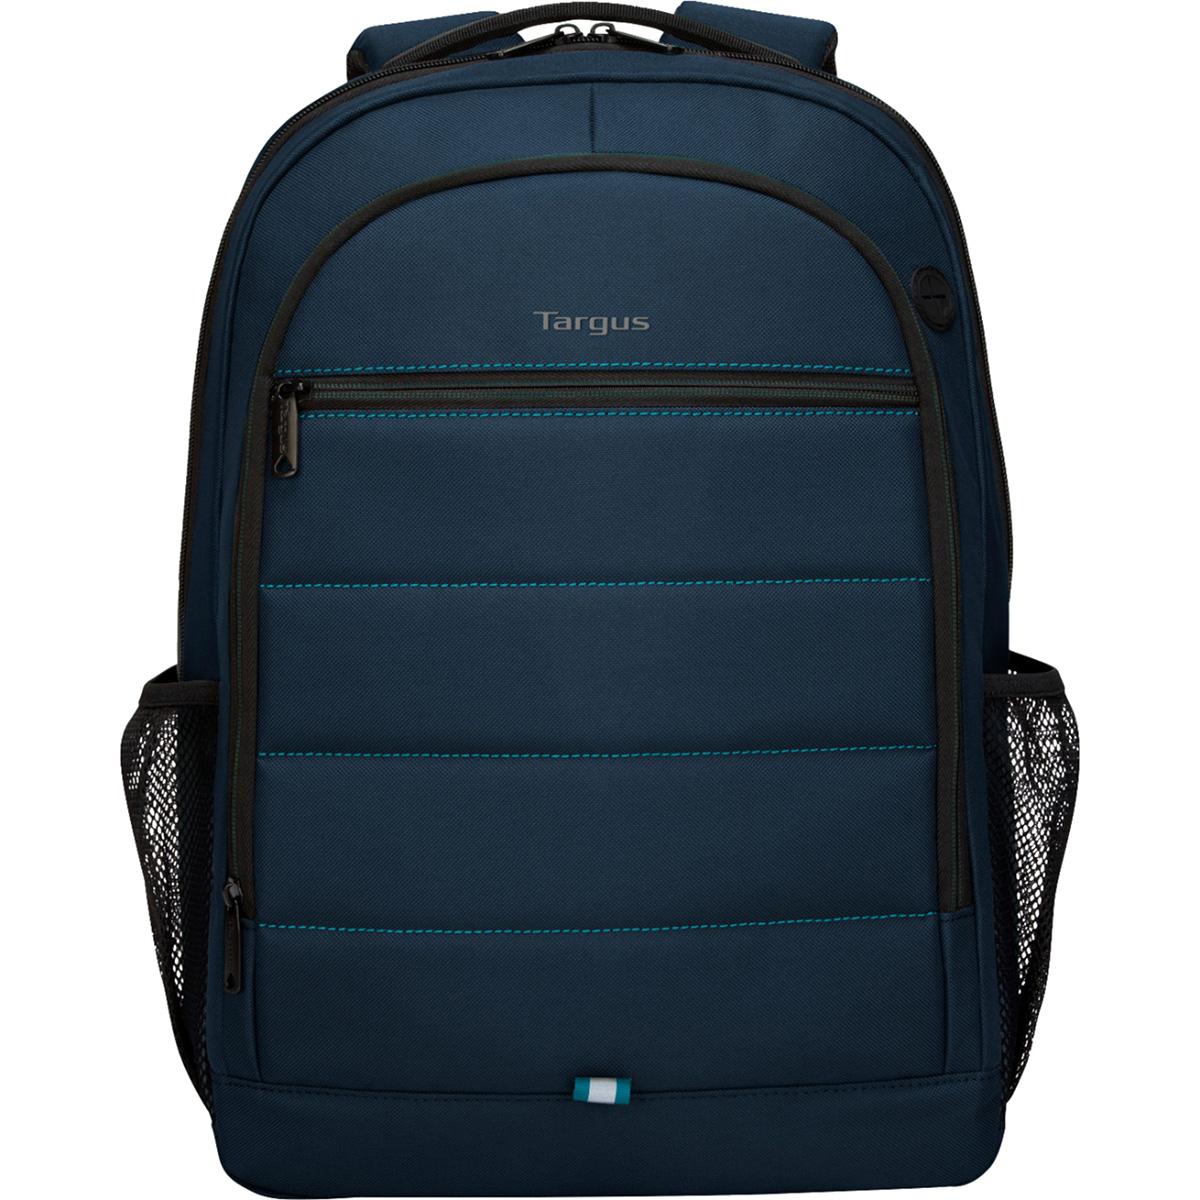 Targus 15.6in Octave Laptop Backpack for $9.99 Shipped